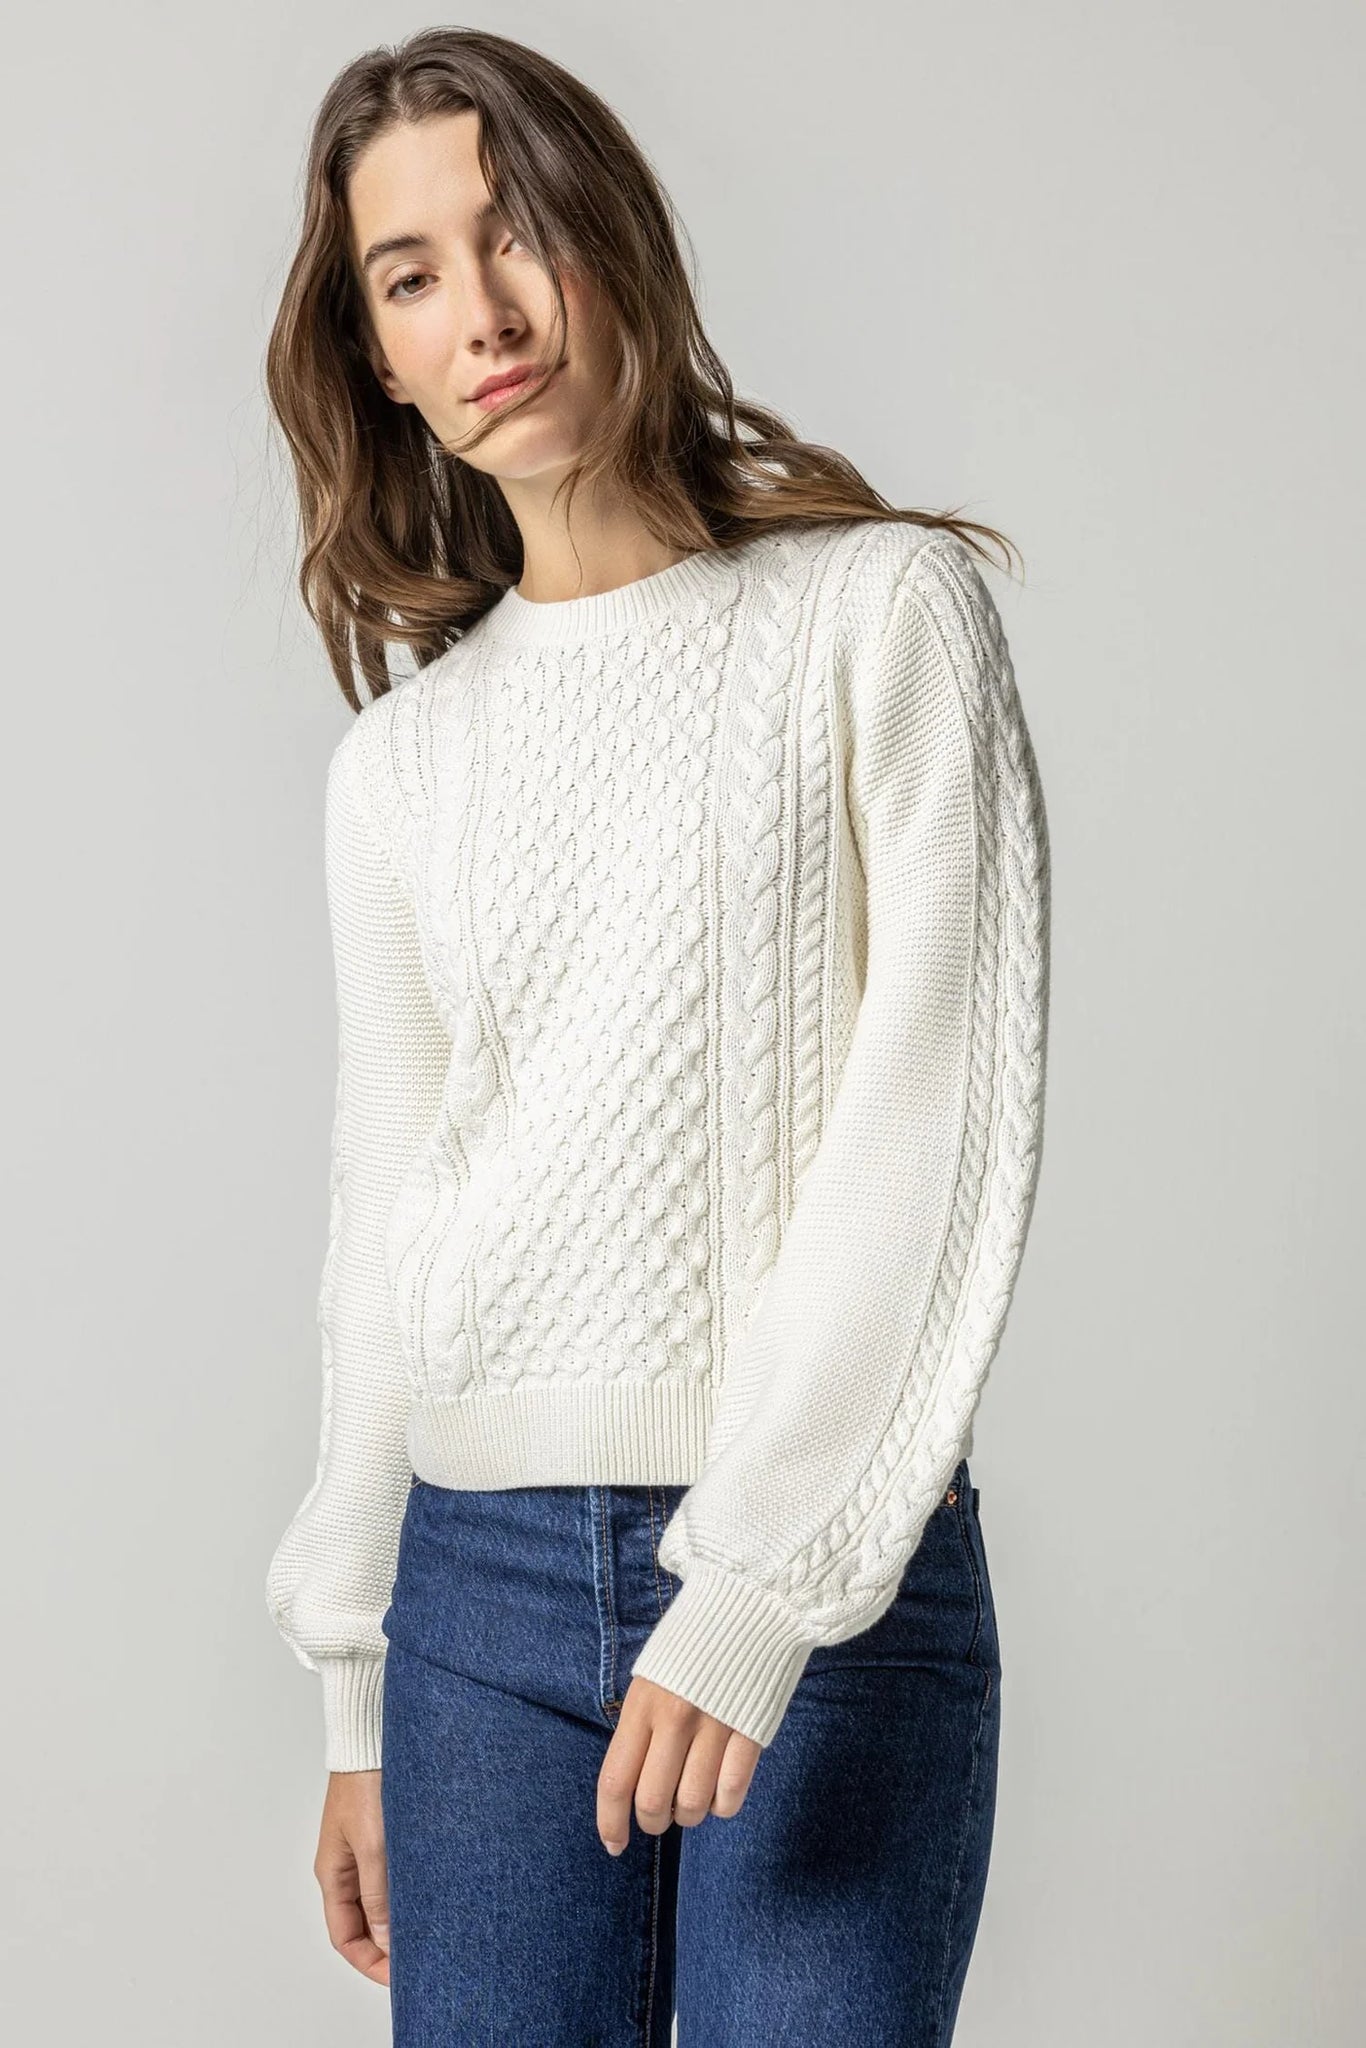 Lilla P Long Sleeve Cable Crewneck Sweater - Ivory